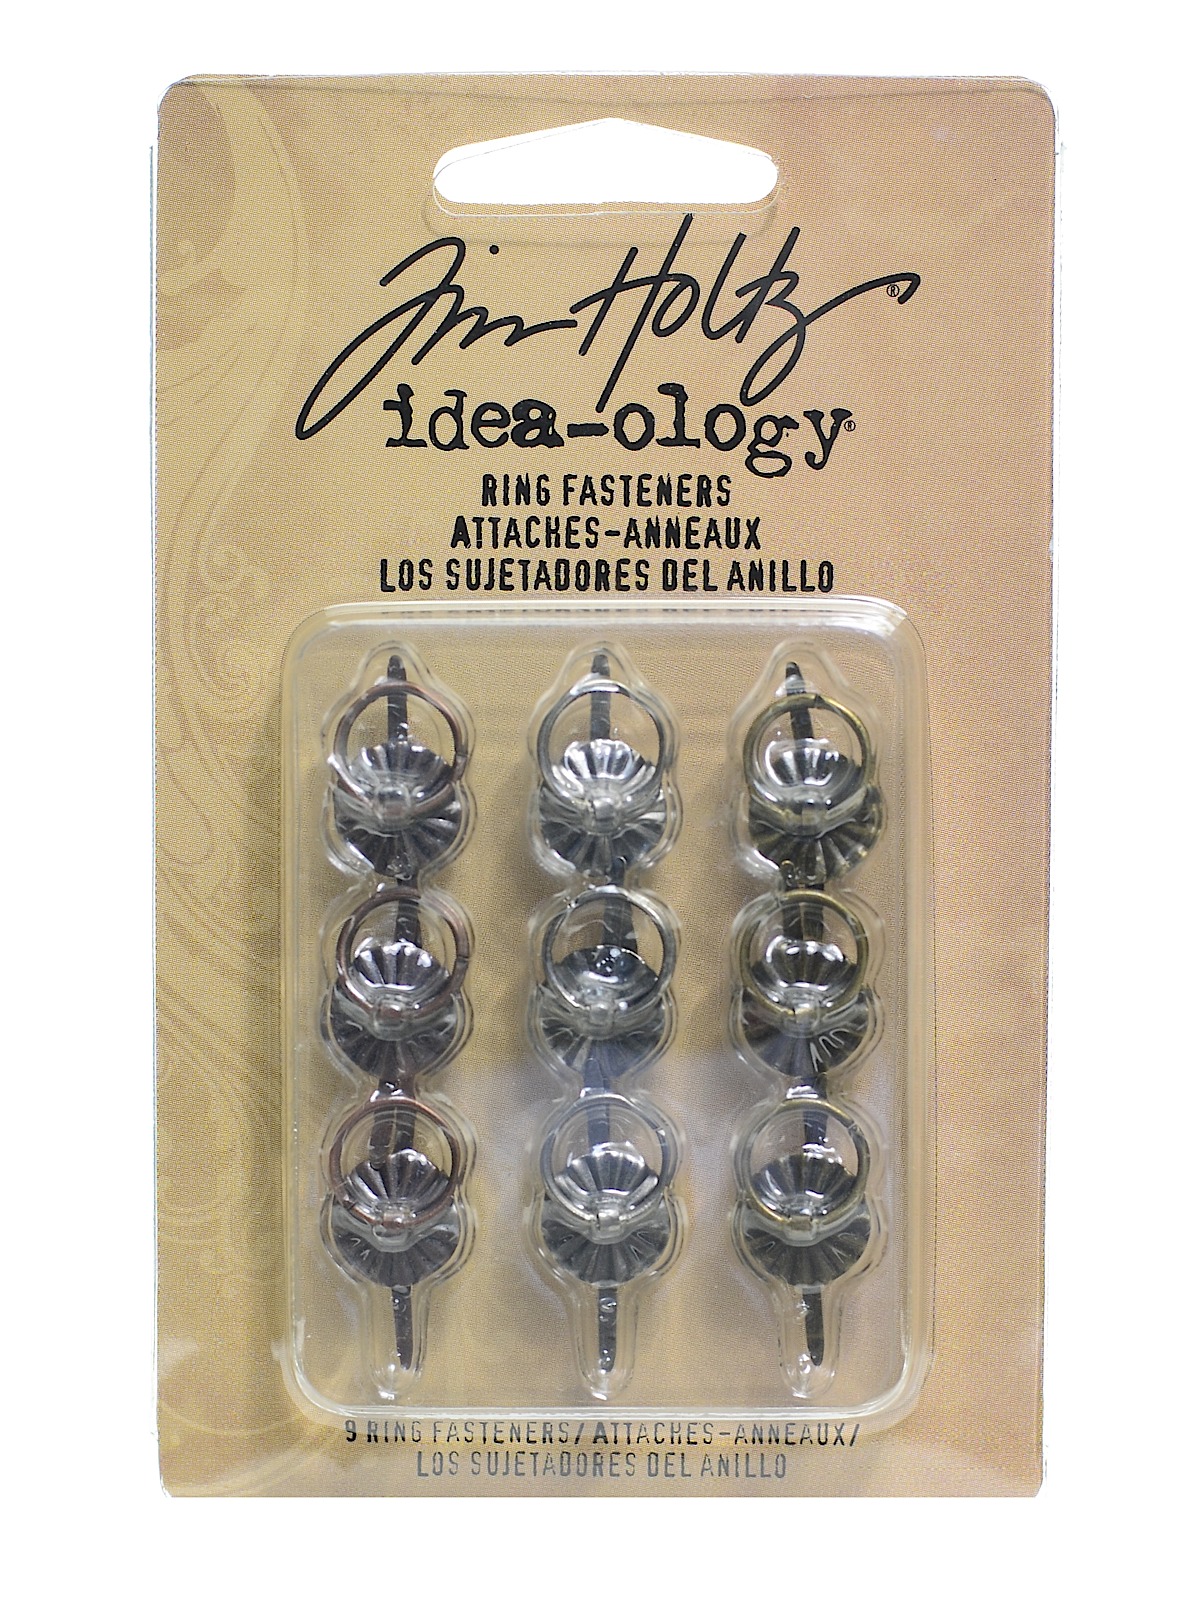 Idea-ology Fasteners Pack Of 9 Ring Fasteners